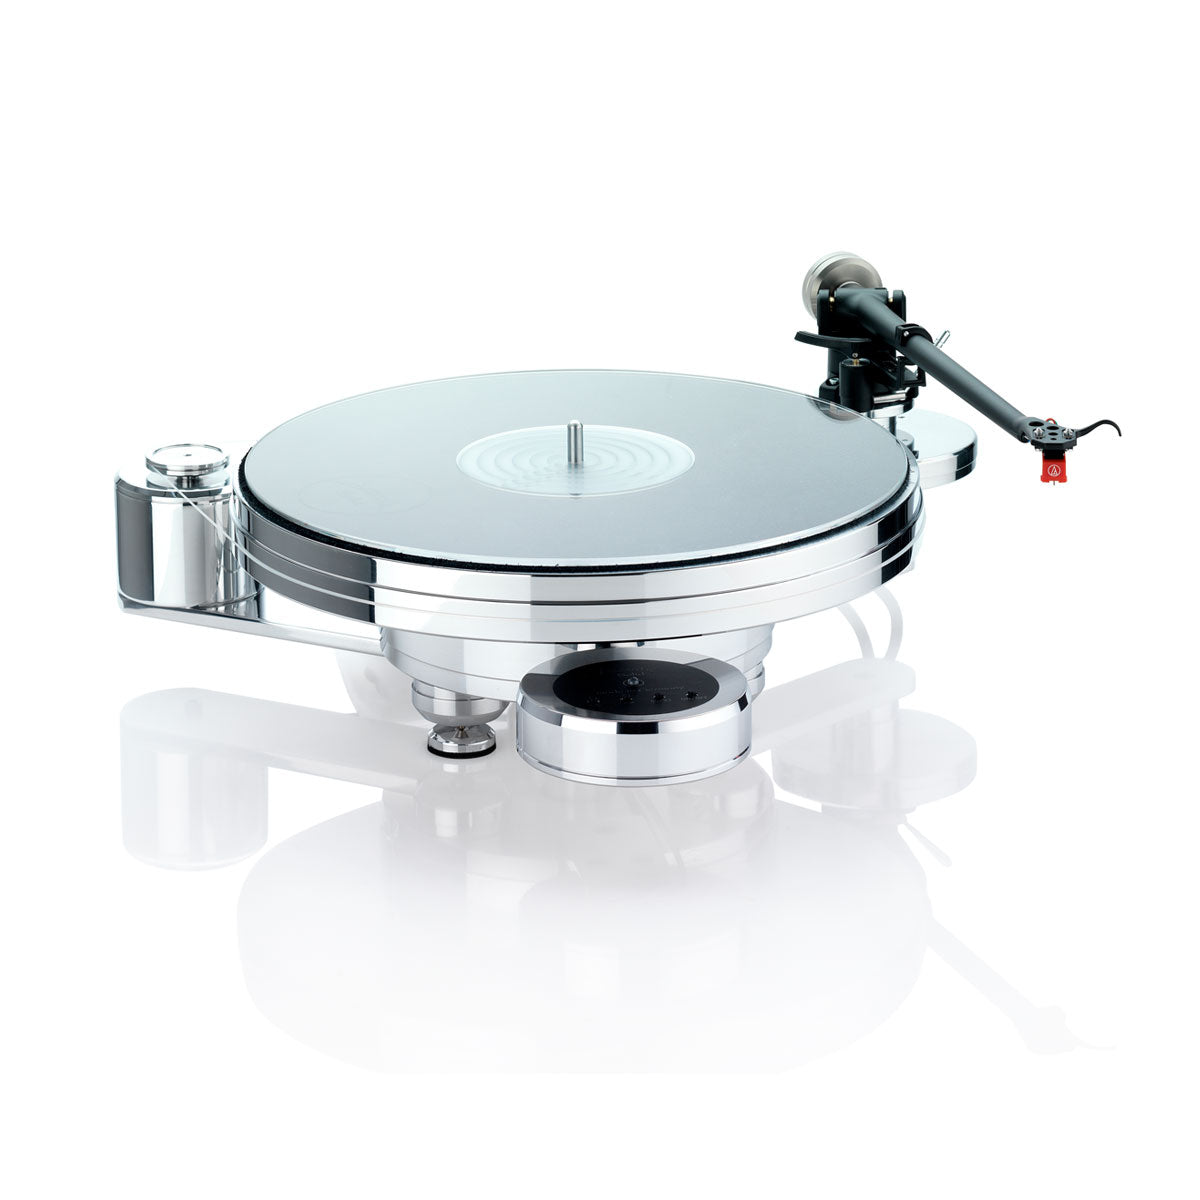 ACOUSTIC SOLID - SOLID 110 METAL POLISHED TURNTABLE - Experience a listening pleasure in perfection with the High-quality technology and acoustics with Acoustic Solid. Best price at Vinyl Sound for all Acoustic Solid Turntables, Cartridges, tonearms and Phono Amplifiers: Acoustic Solid - Solid Brake - Acoustic Solid - Solid Machine – Acoustic Solid - Solid Edition – Acoustic Solid - Solid Royal – Acoustic Solid - Solid Stand